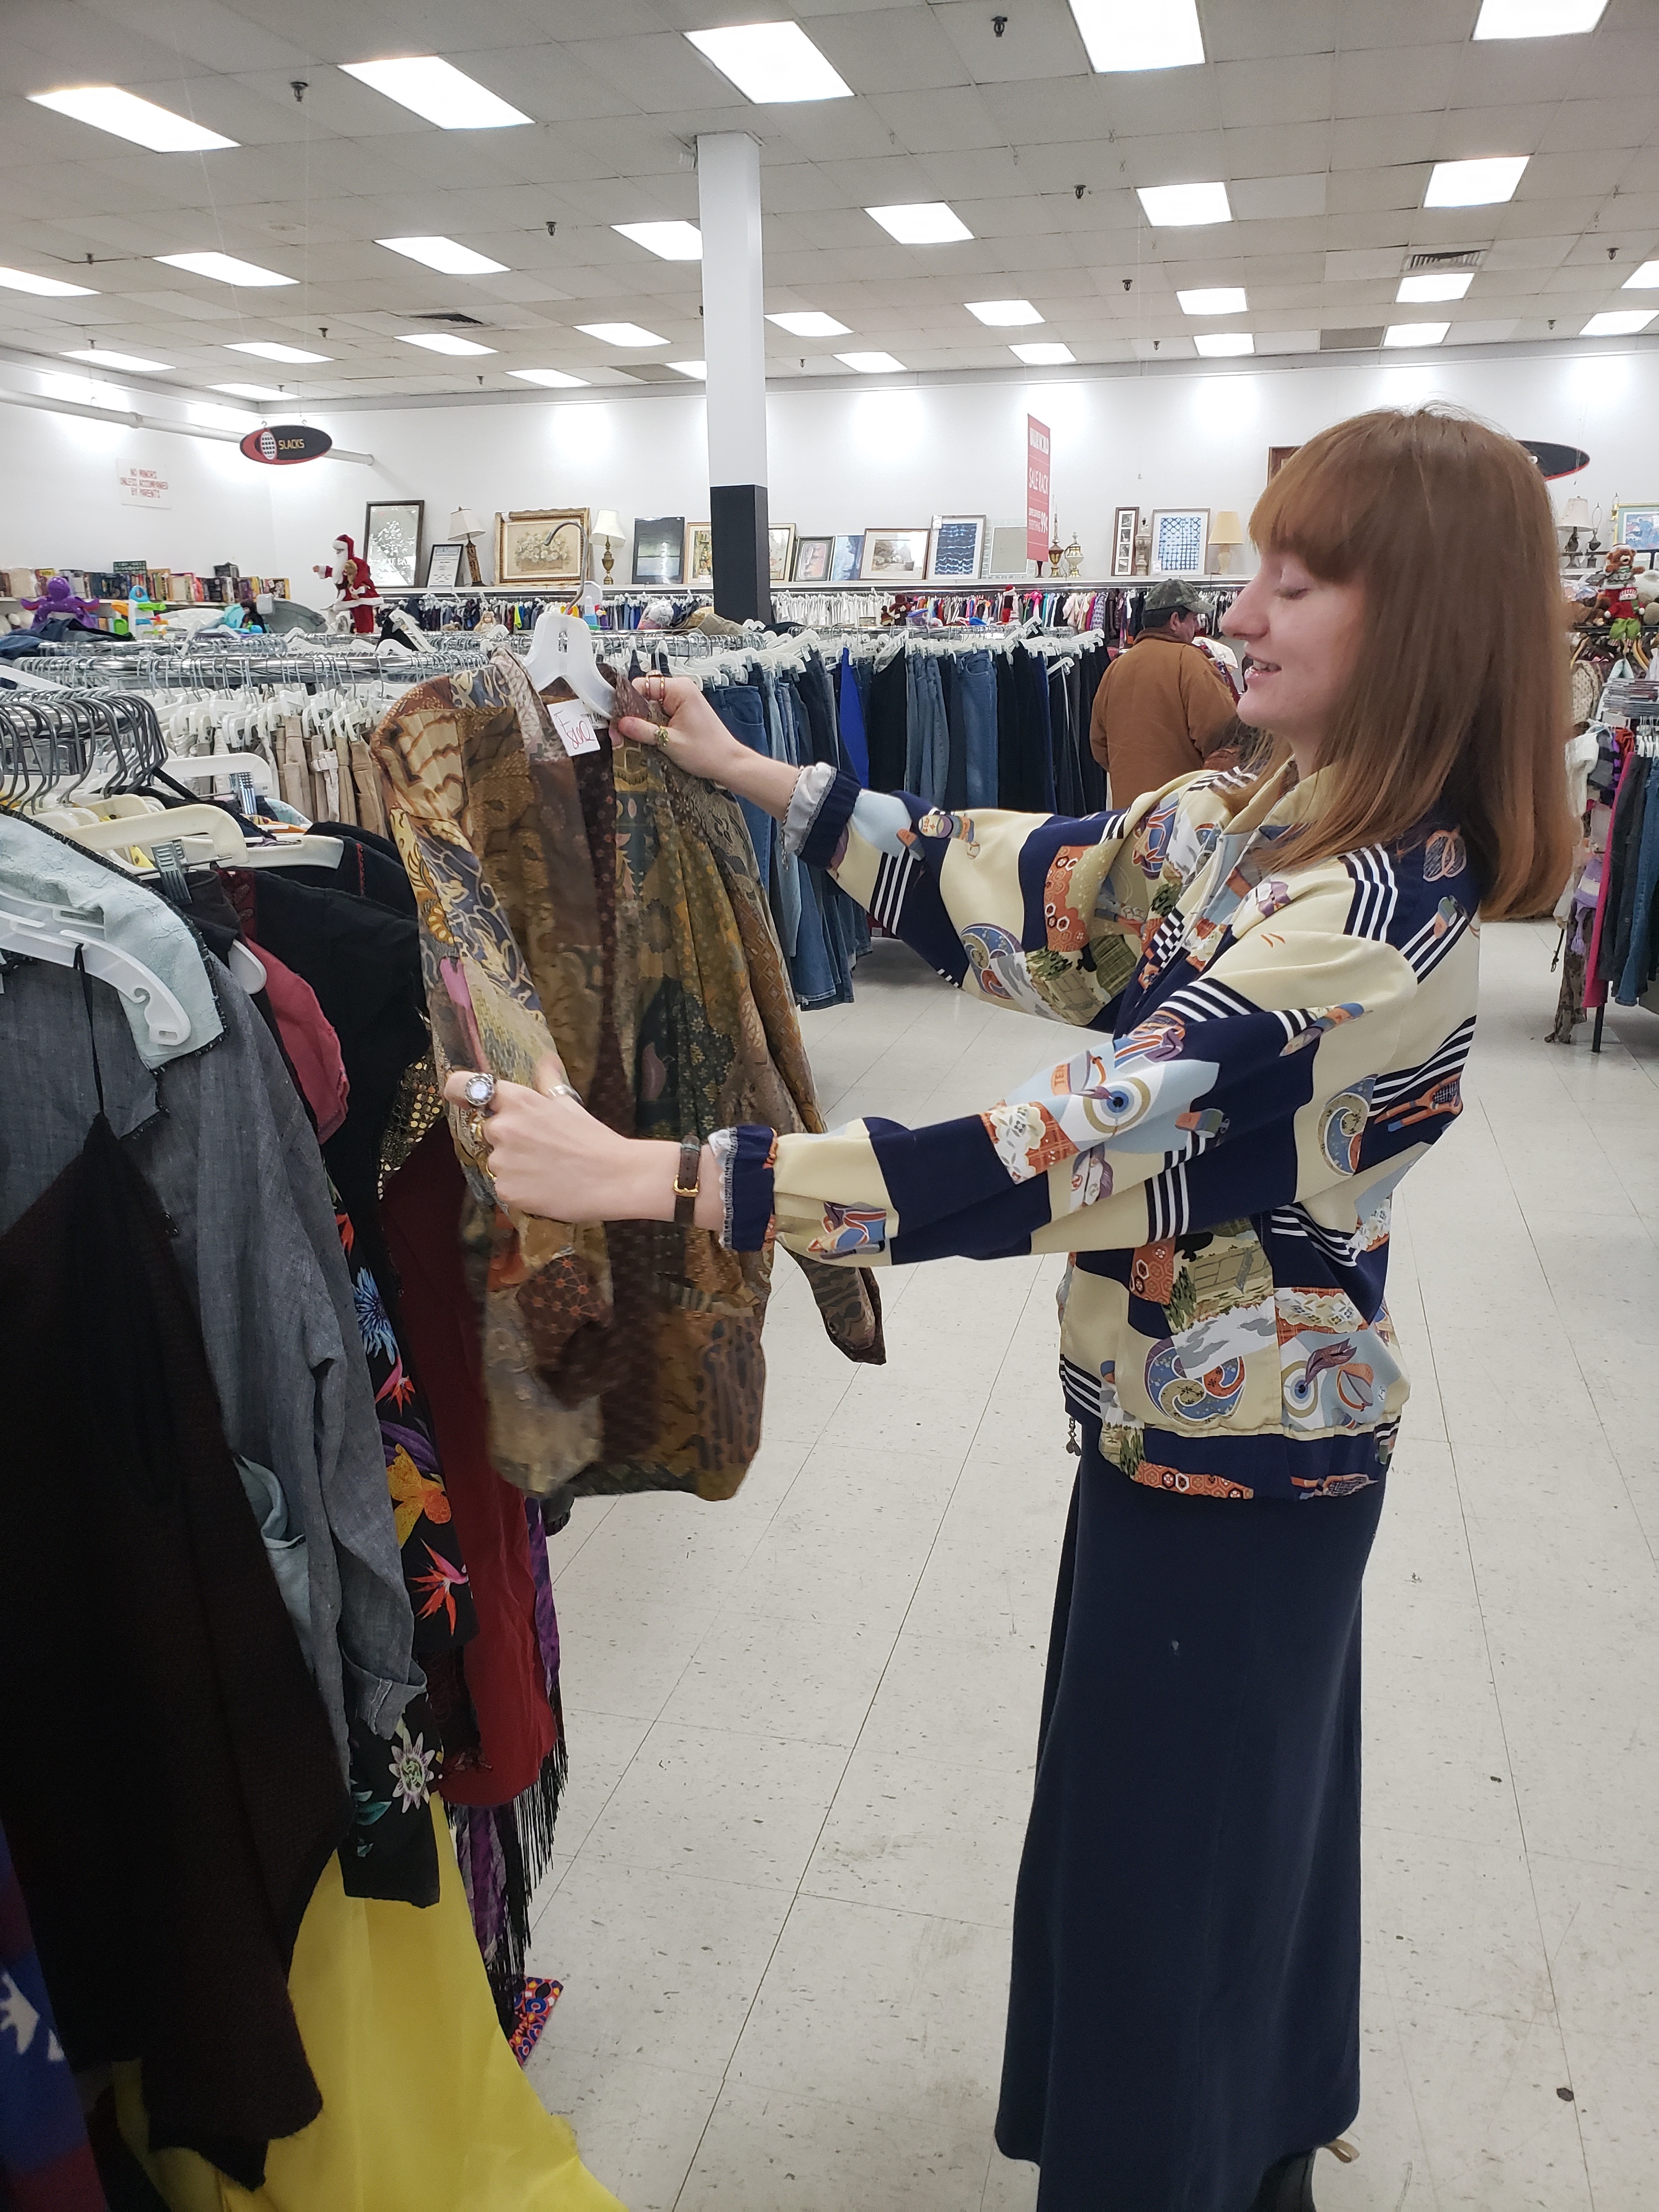 Photo shows Olivia Grantham browsing clothing racks at a thrift store